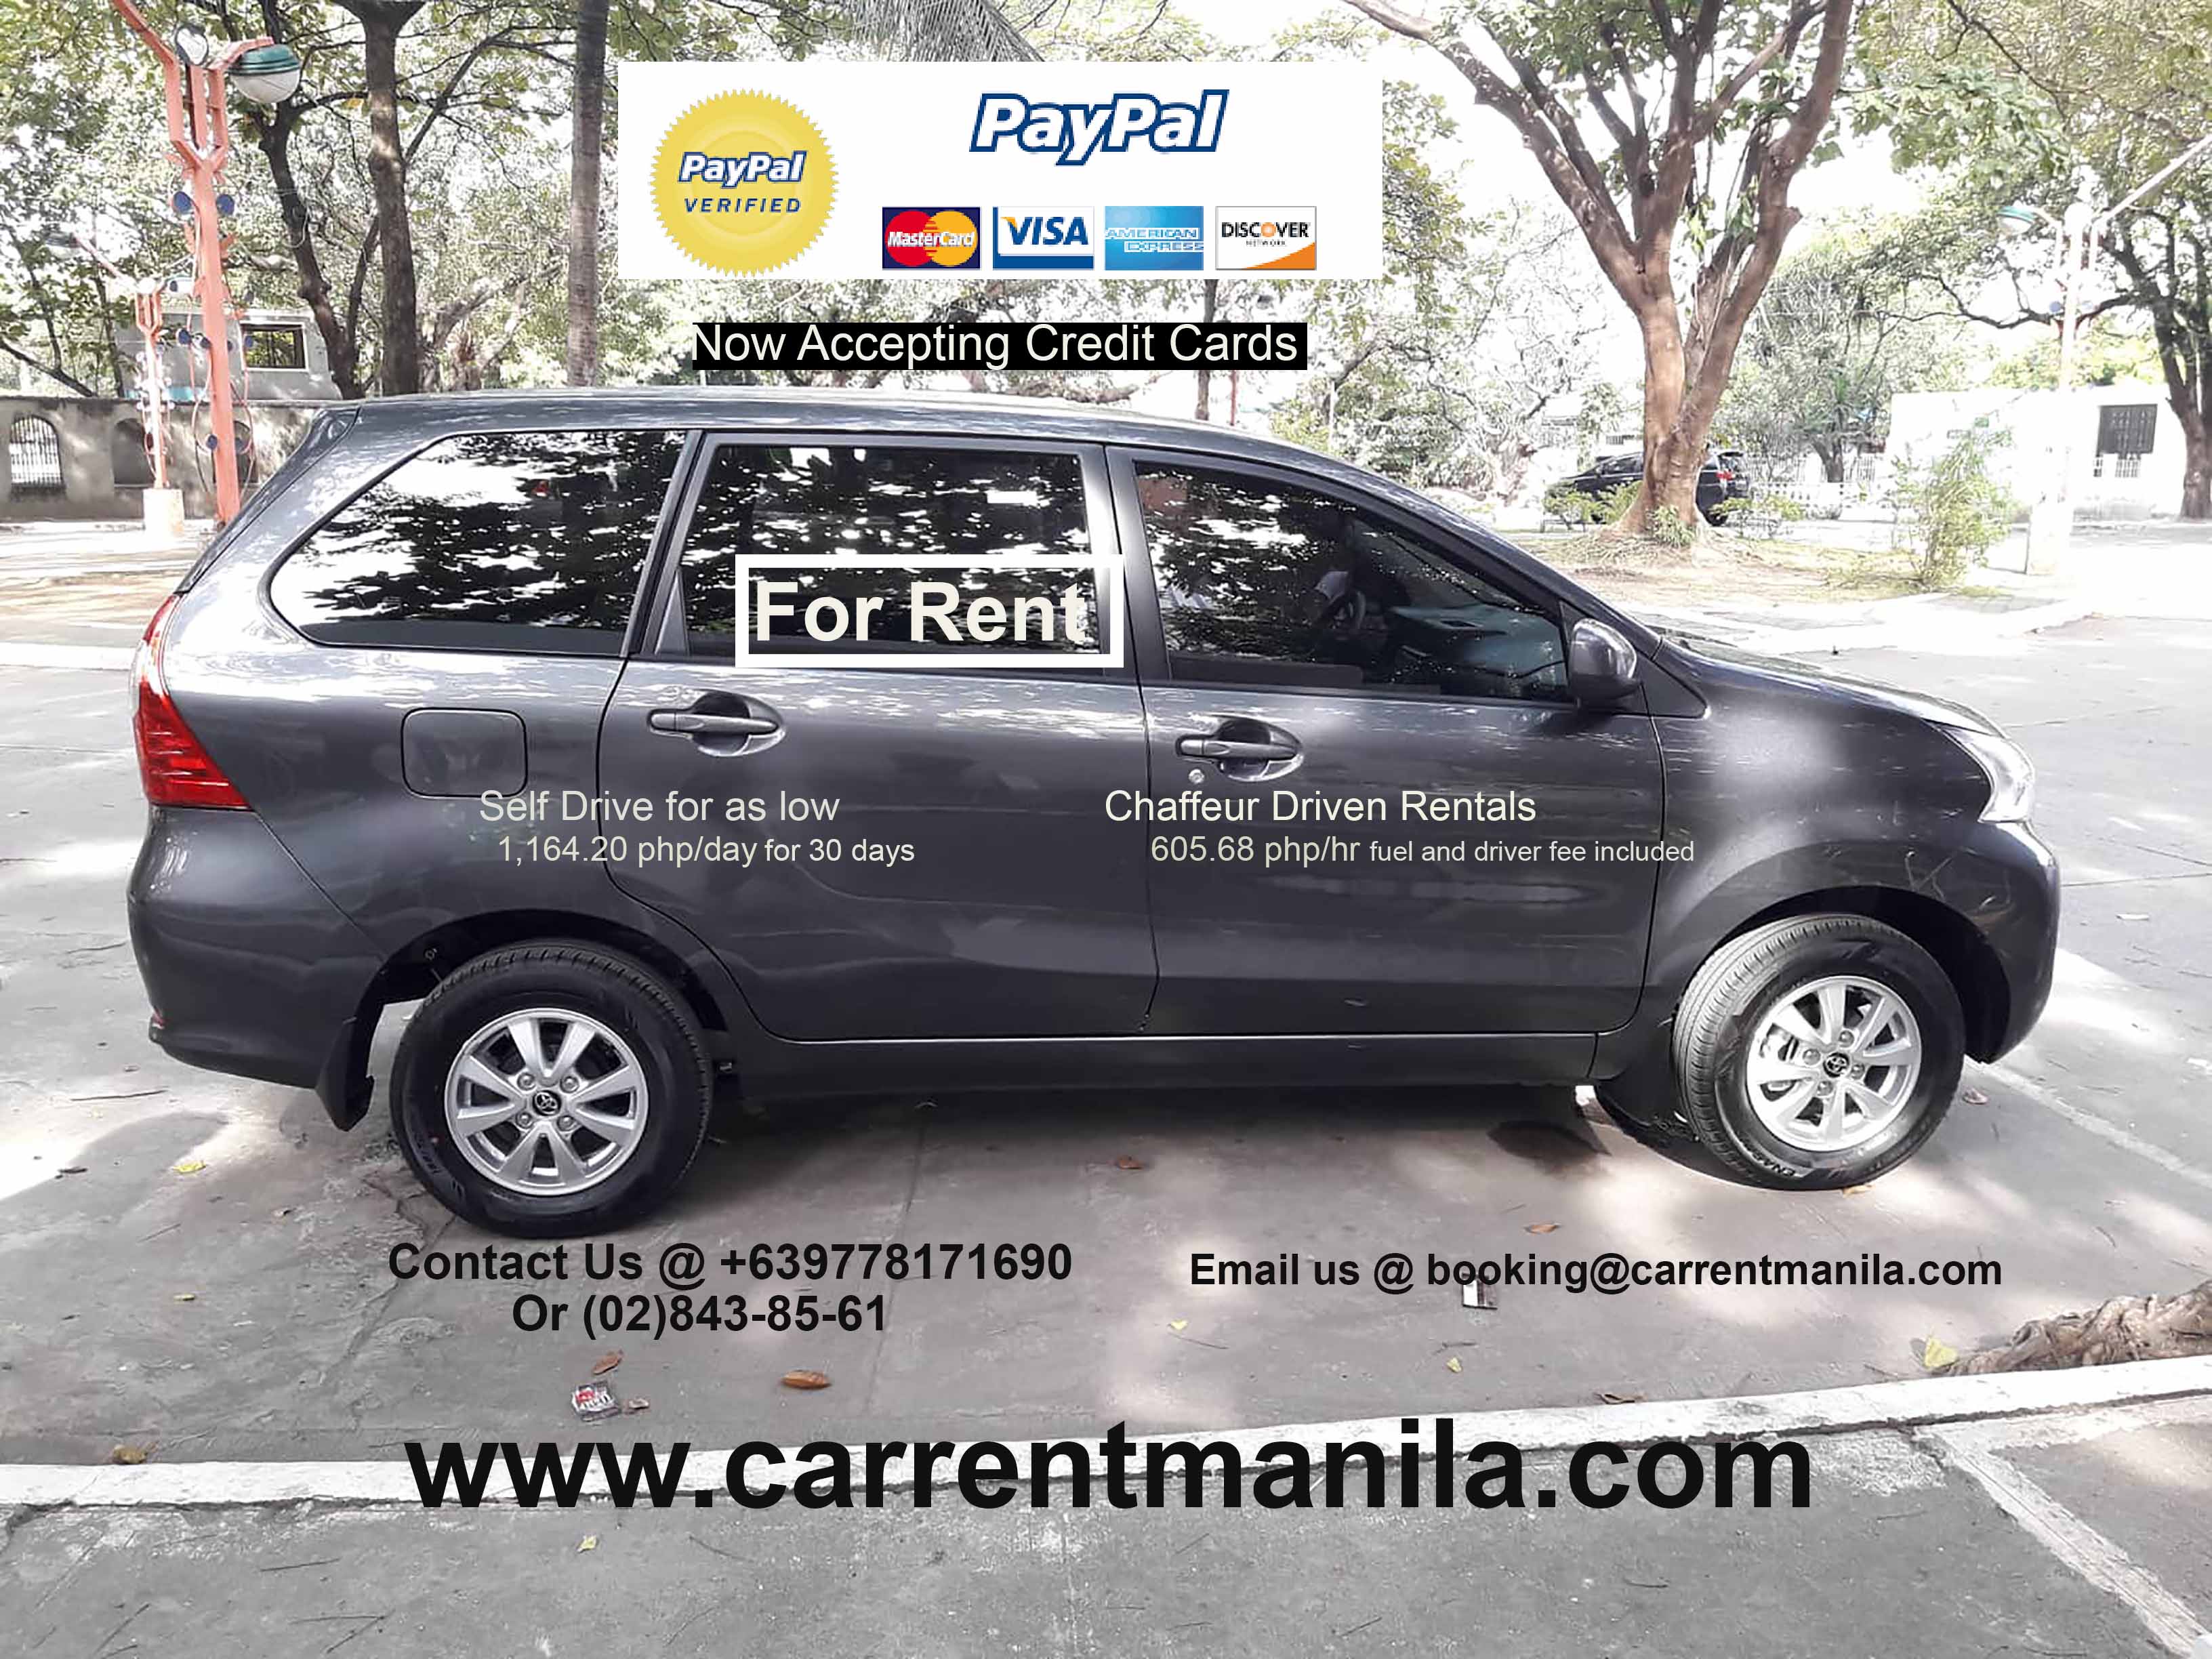 cheapest auv rent a car manila with paypal.